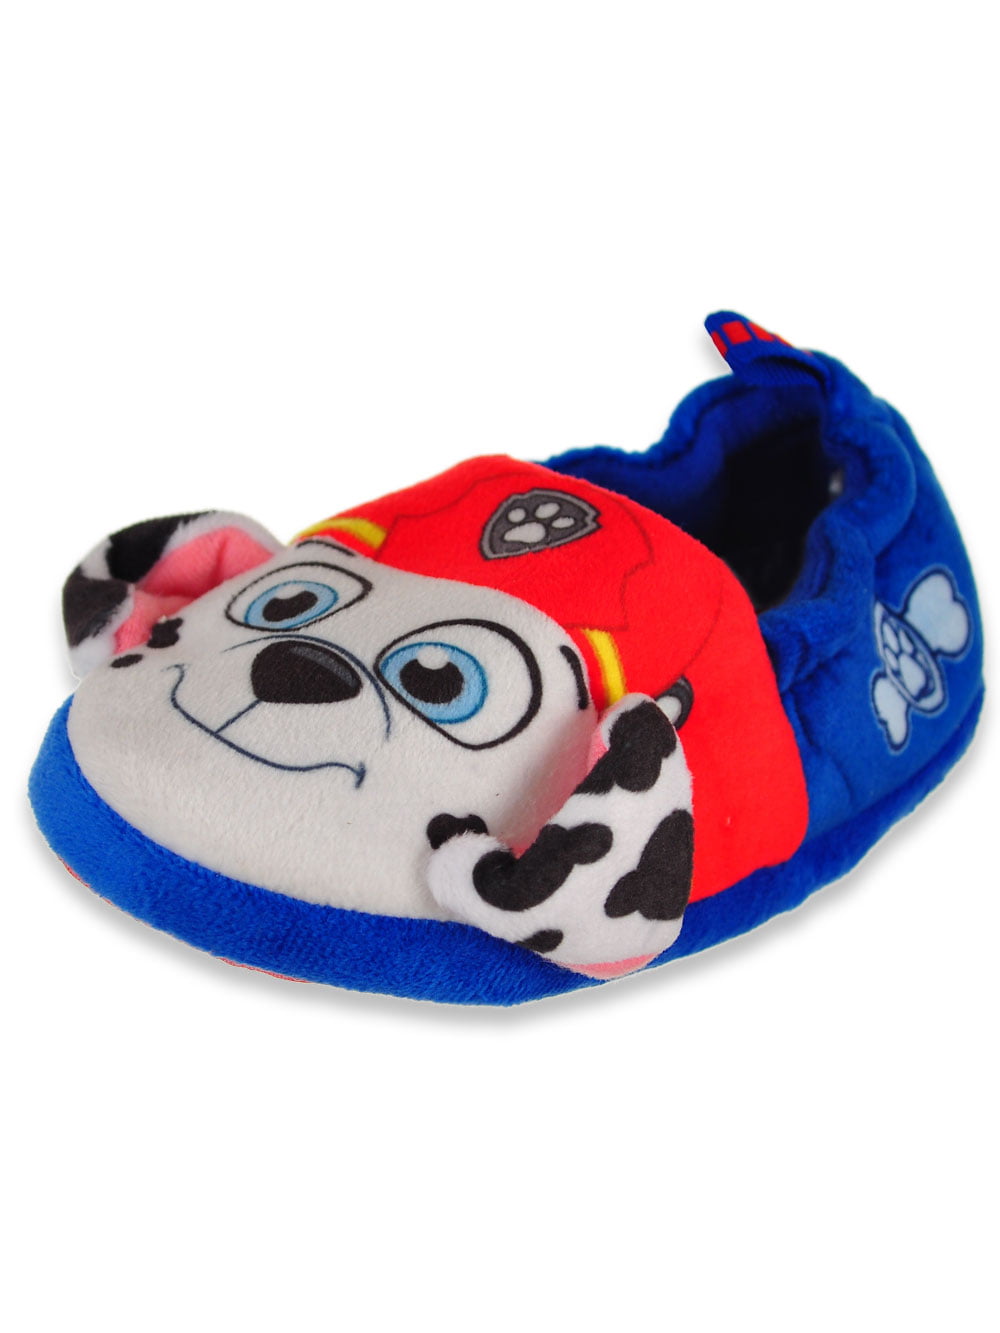 Paw Patrol Boys Slippers with Chase and Marshall 